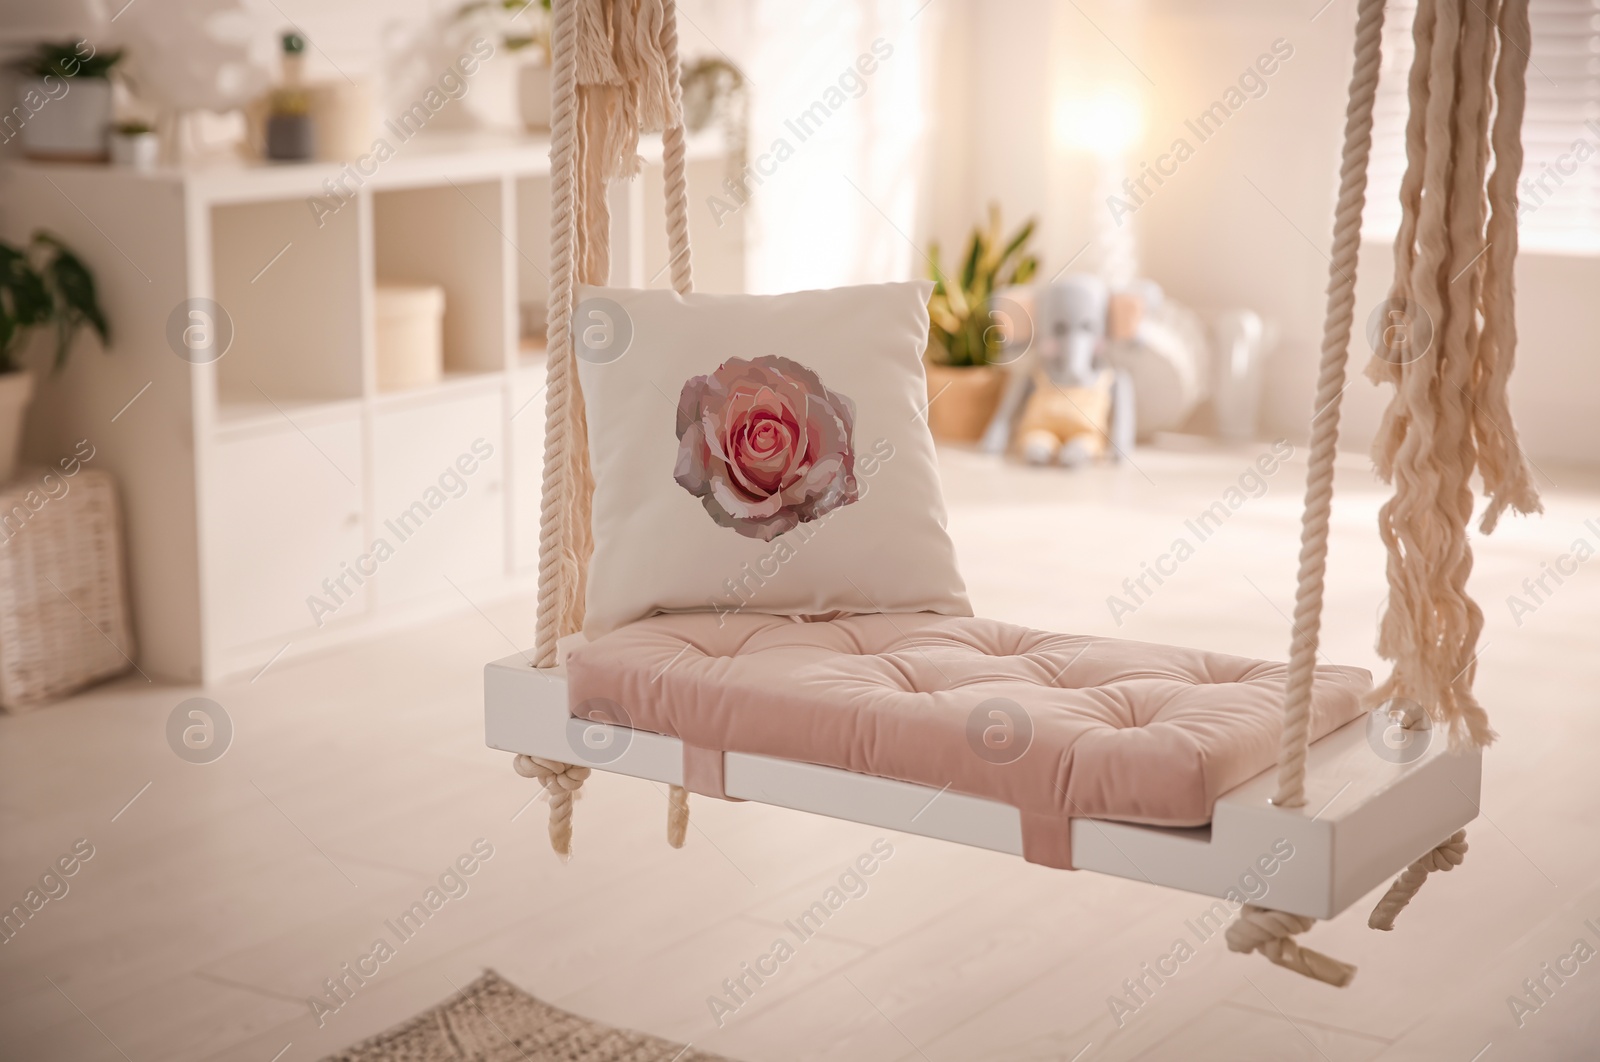 Image of Soft pillow with printed rose on swing indoors